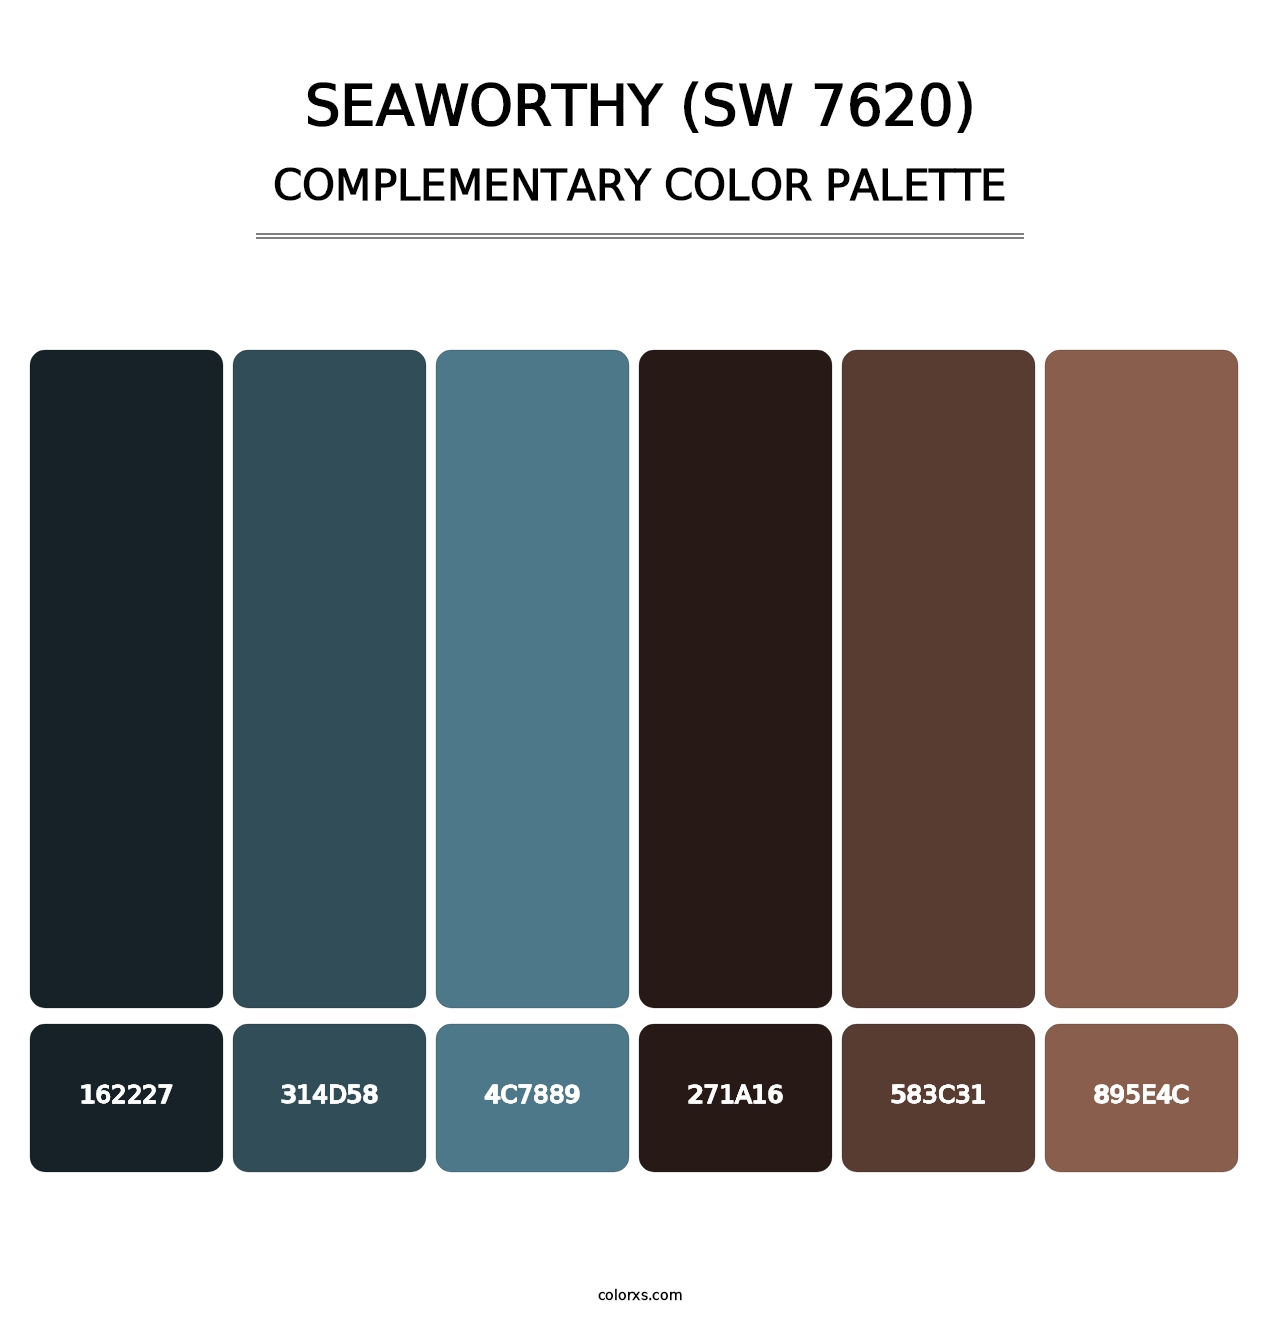 Seaworthy (SW 7620) - Complementary Color Palette